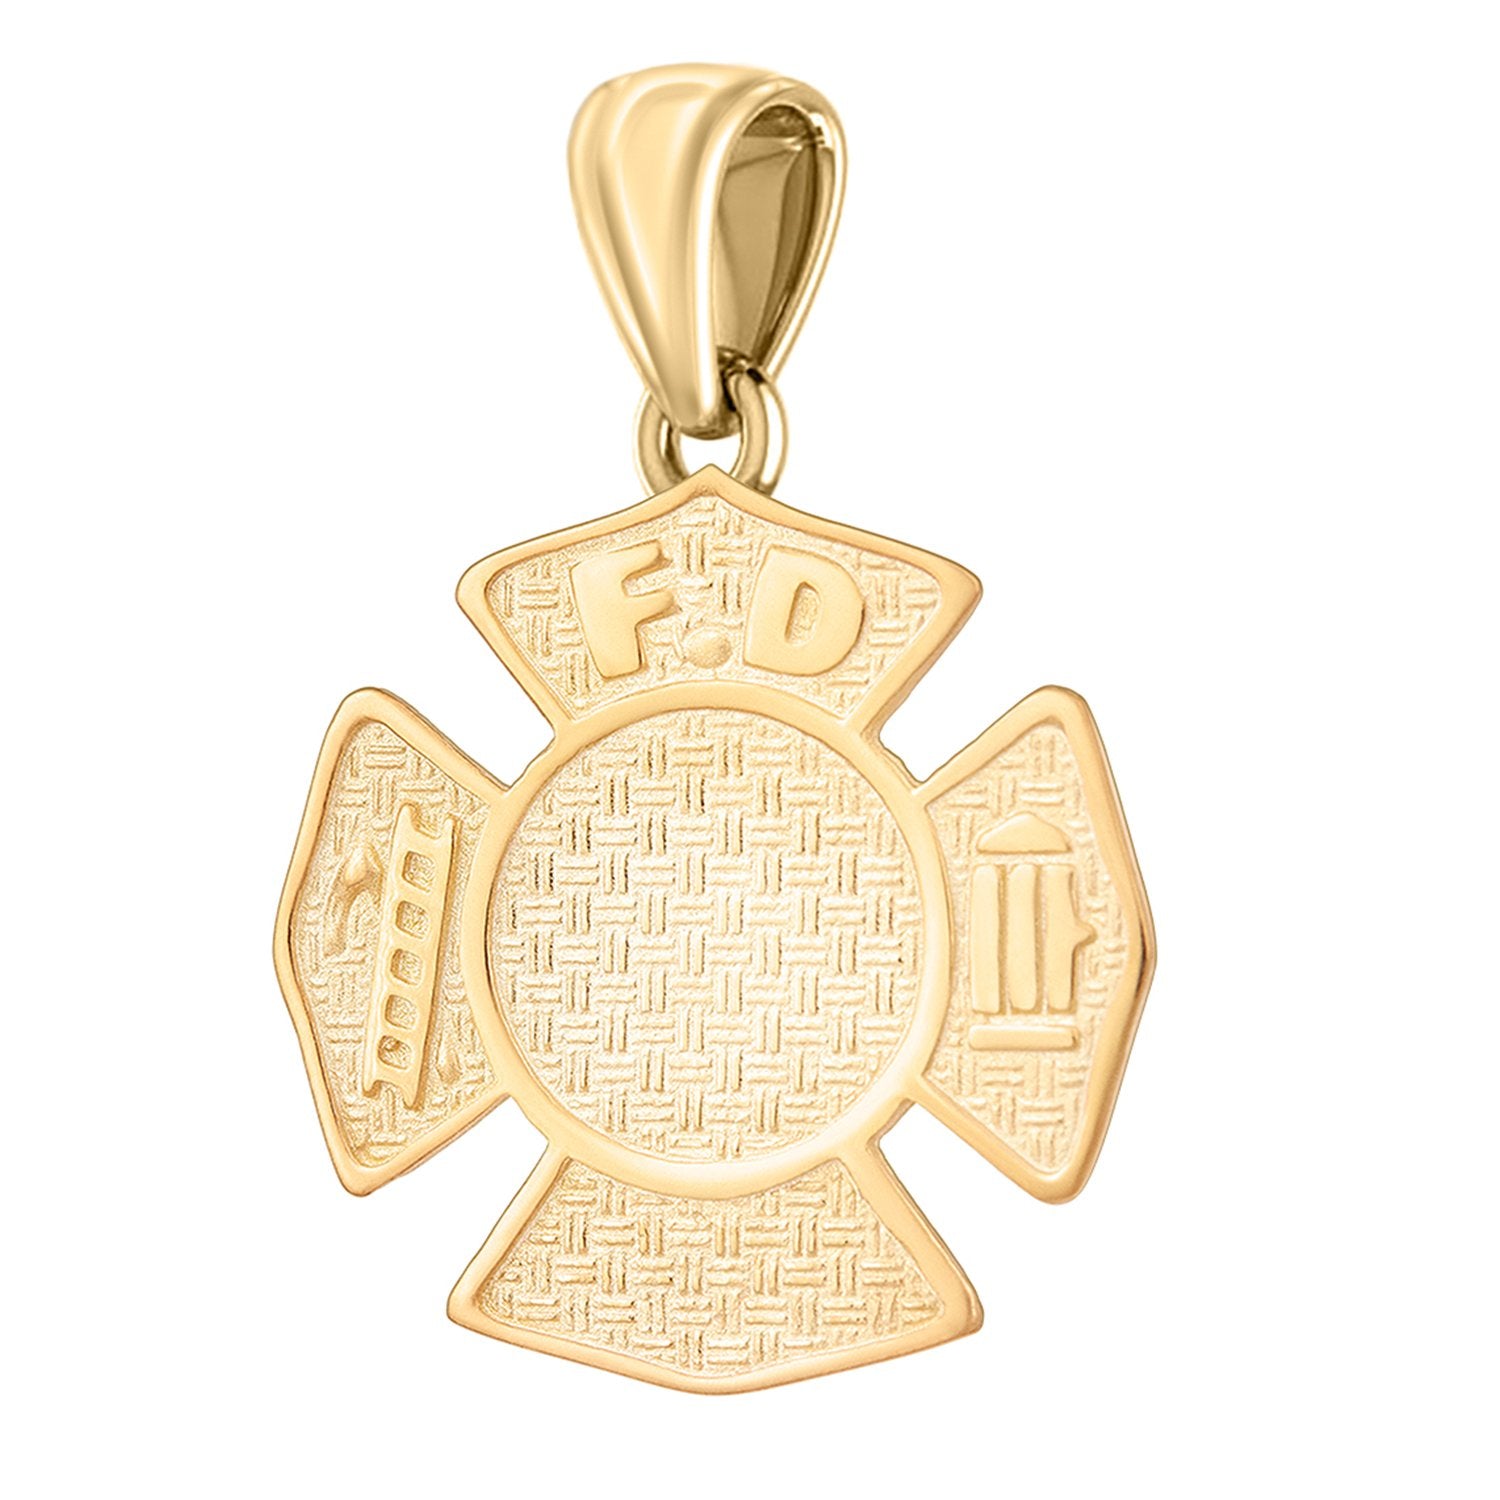 Firefighter Pendant of Gold for Ladies - No Chain